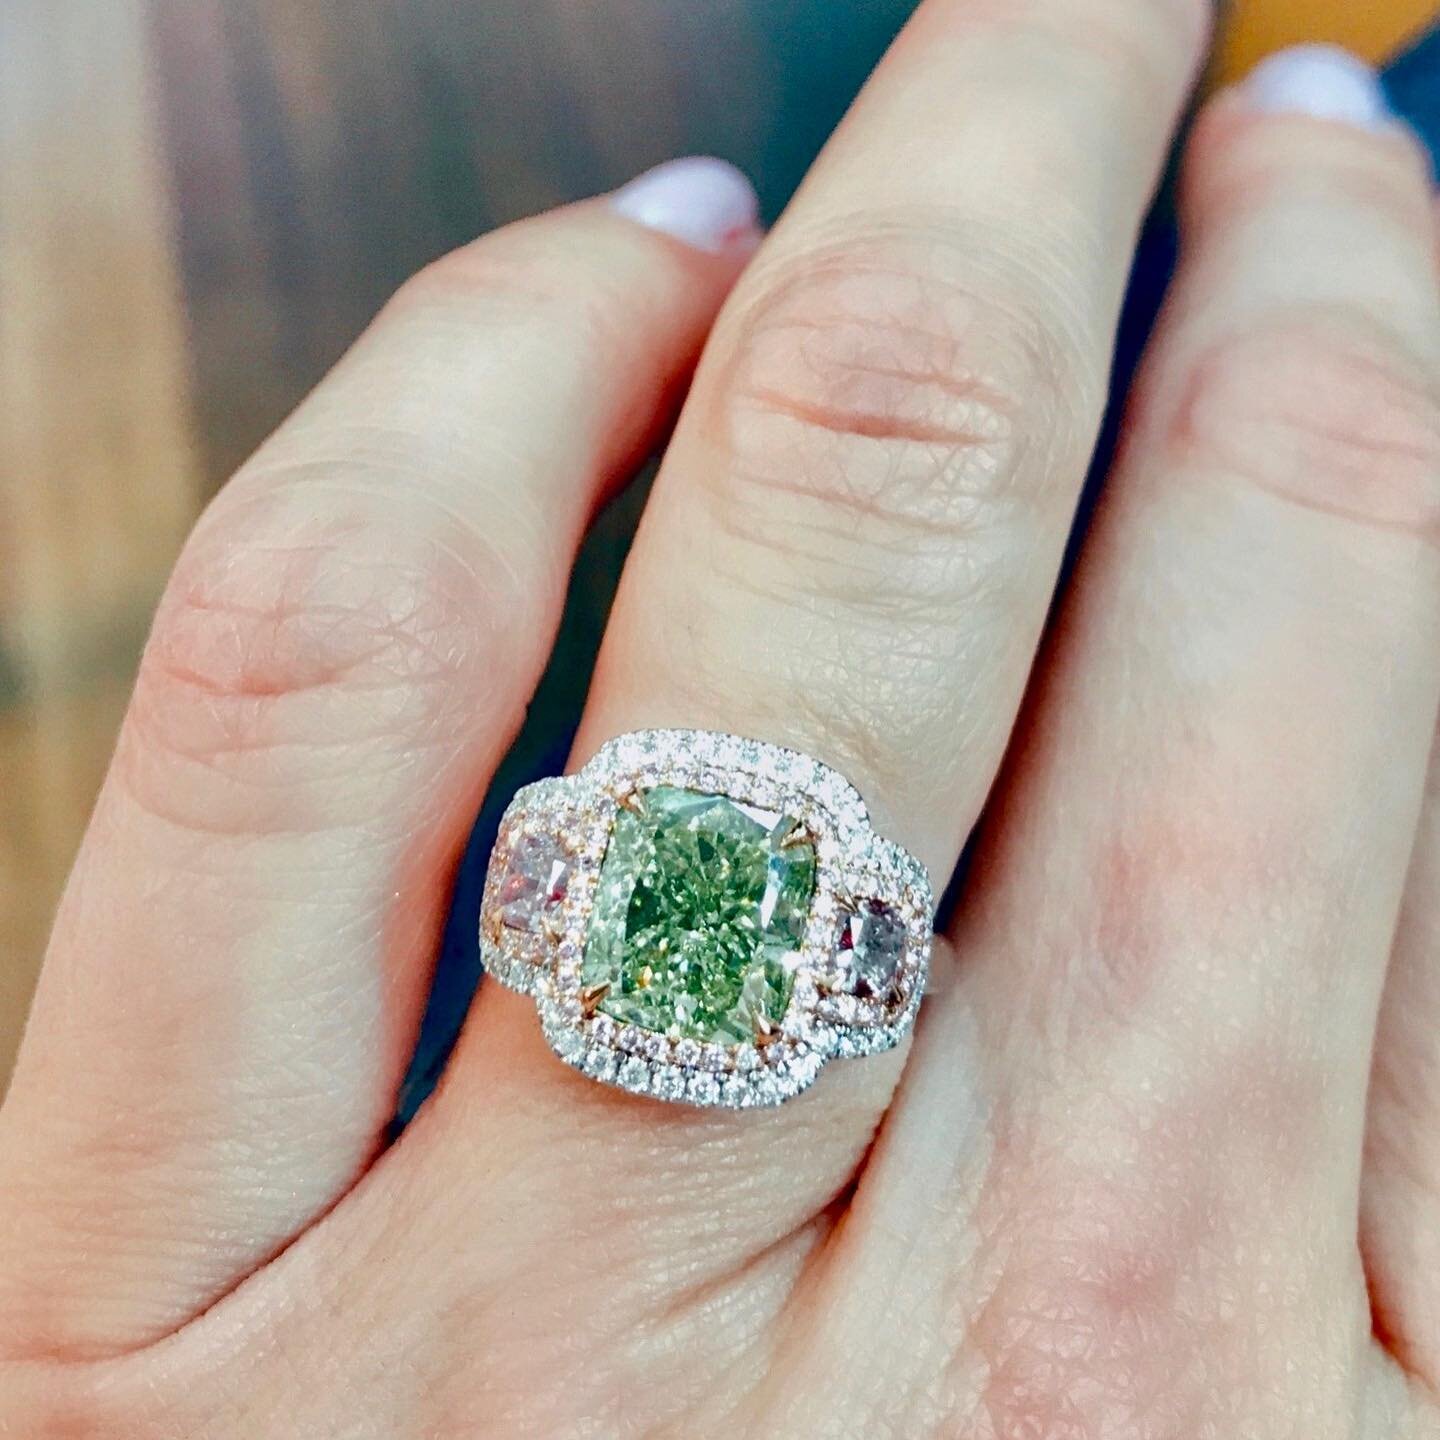 I do find green diamonds fascinating ever since I saw pictures and heard about the Dresden Green, the largest green diamond in the world at 41 carats.
⠀⠀⠀⠀⠀⠀⠀⠀⠀
Besides the blue Hope diamond, it is the second most famous coloured diamond. 
⠀⠀⠀⠀⠀⠀⠀⠀⠀
